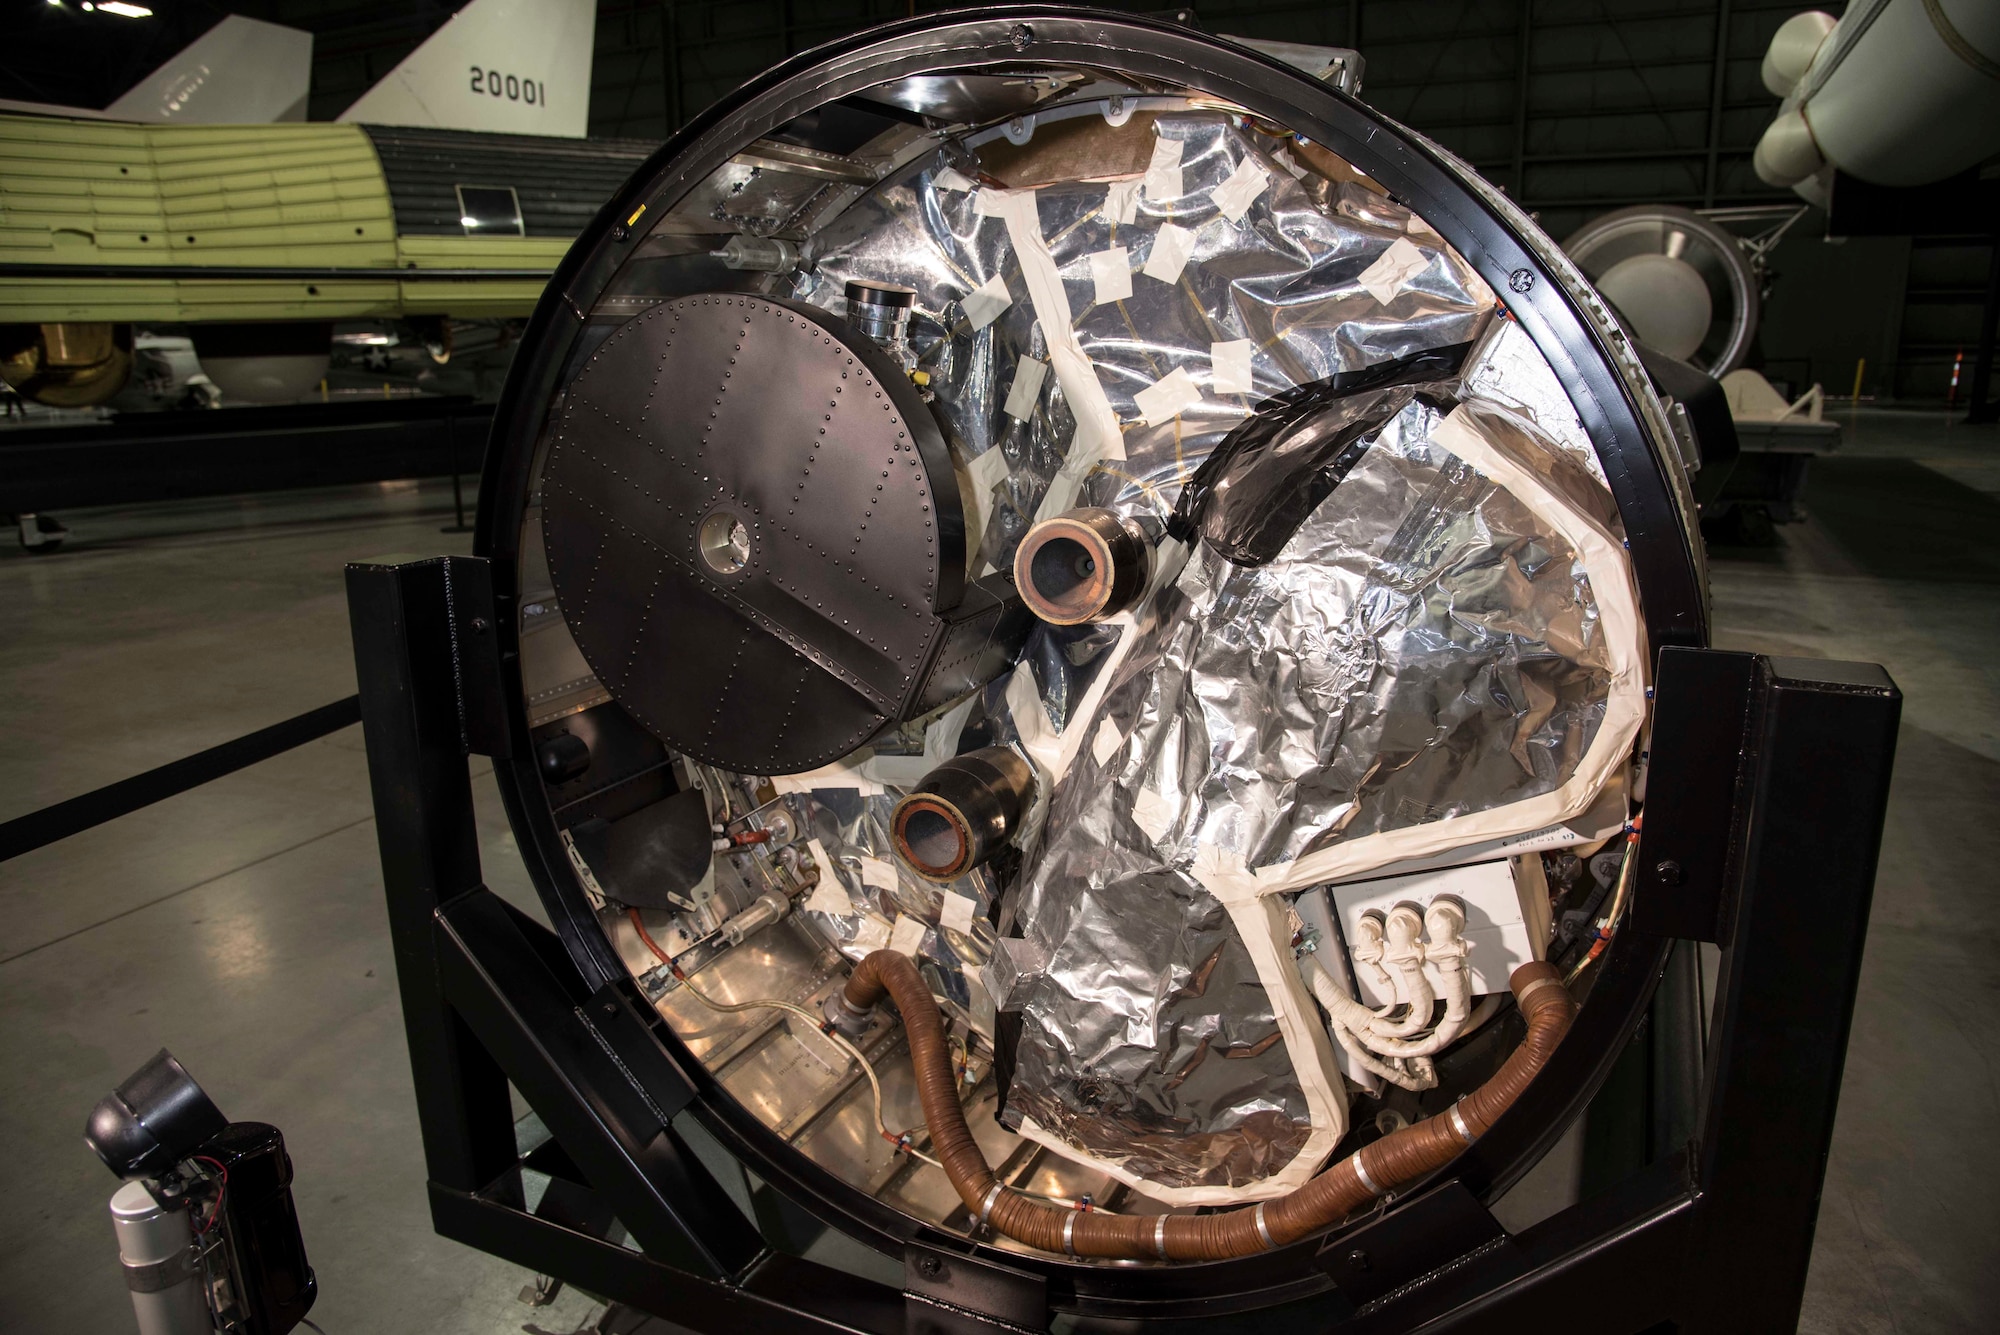 DAYTON, Ohio -- Gambit 1 KH-7 reconnaissance satellite (rear view) in the Space Gallery at the National Museum of the U.S. Air Force. (U.S. Air Force Photo)